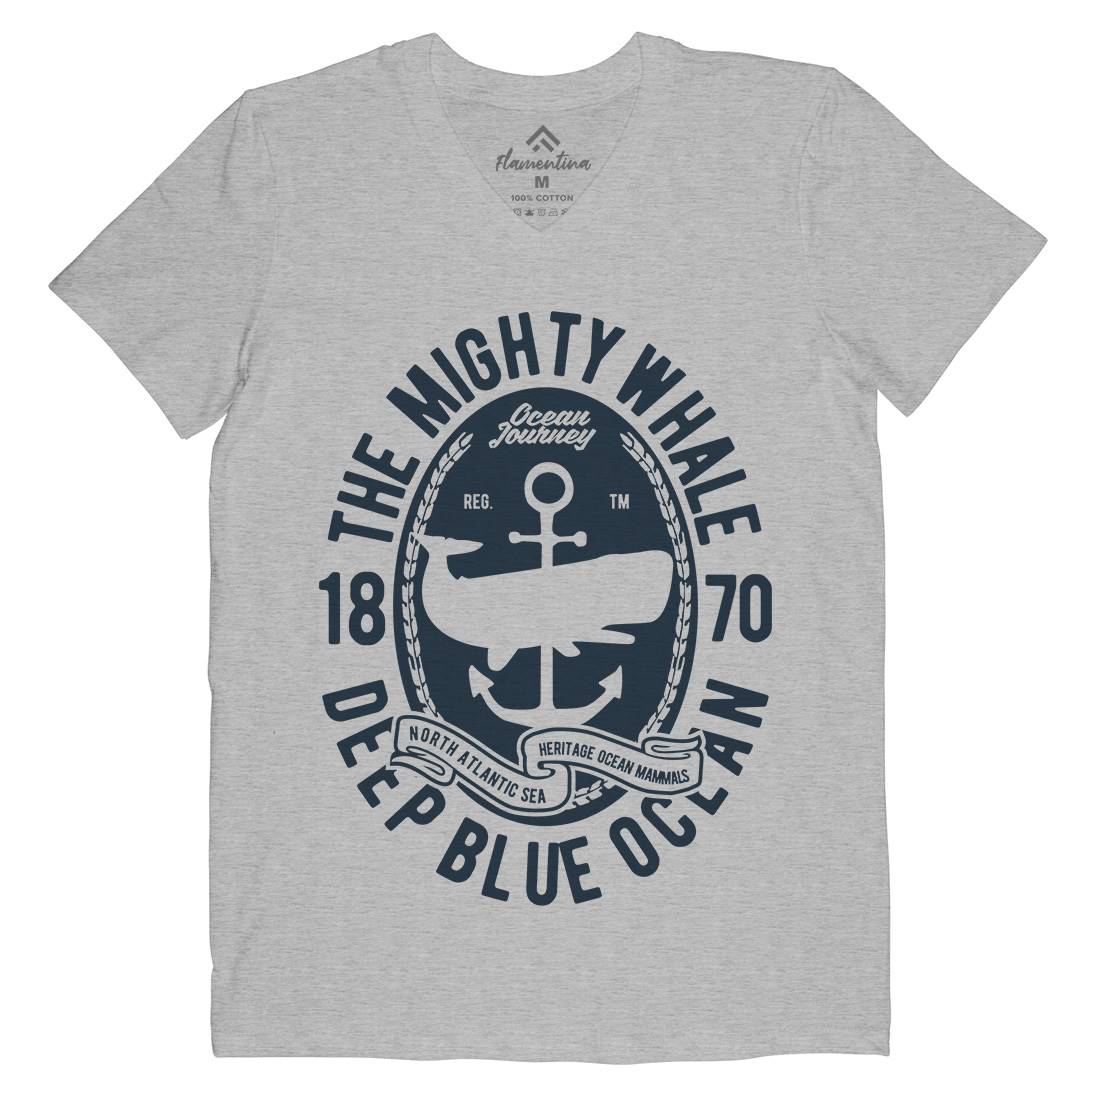 The Mighty Whale Mens V-Neck T-Shirt Navy B466